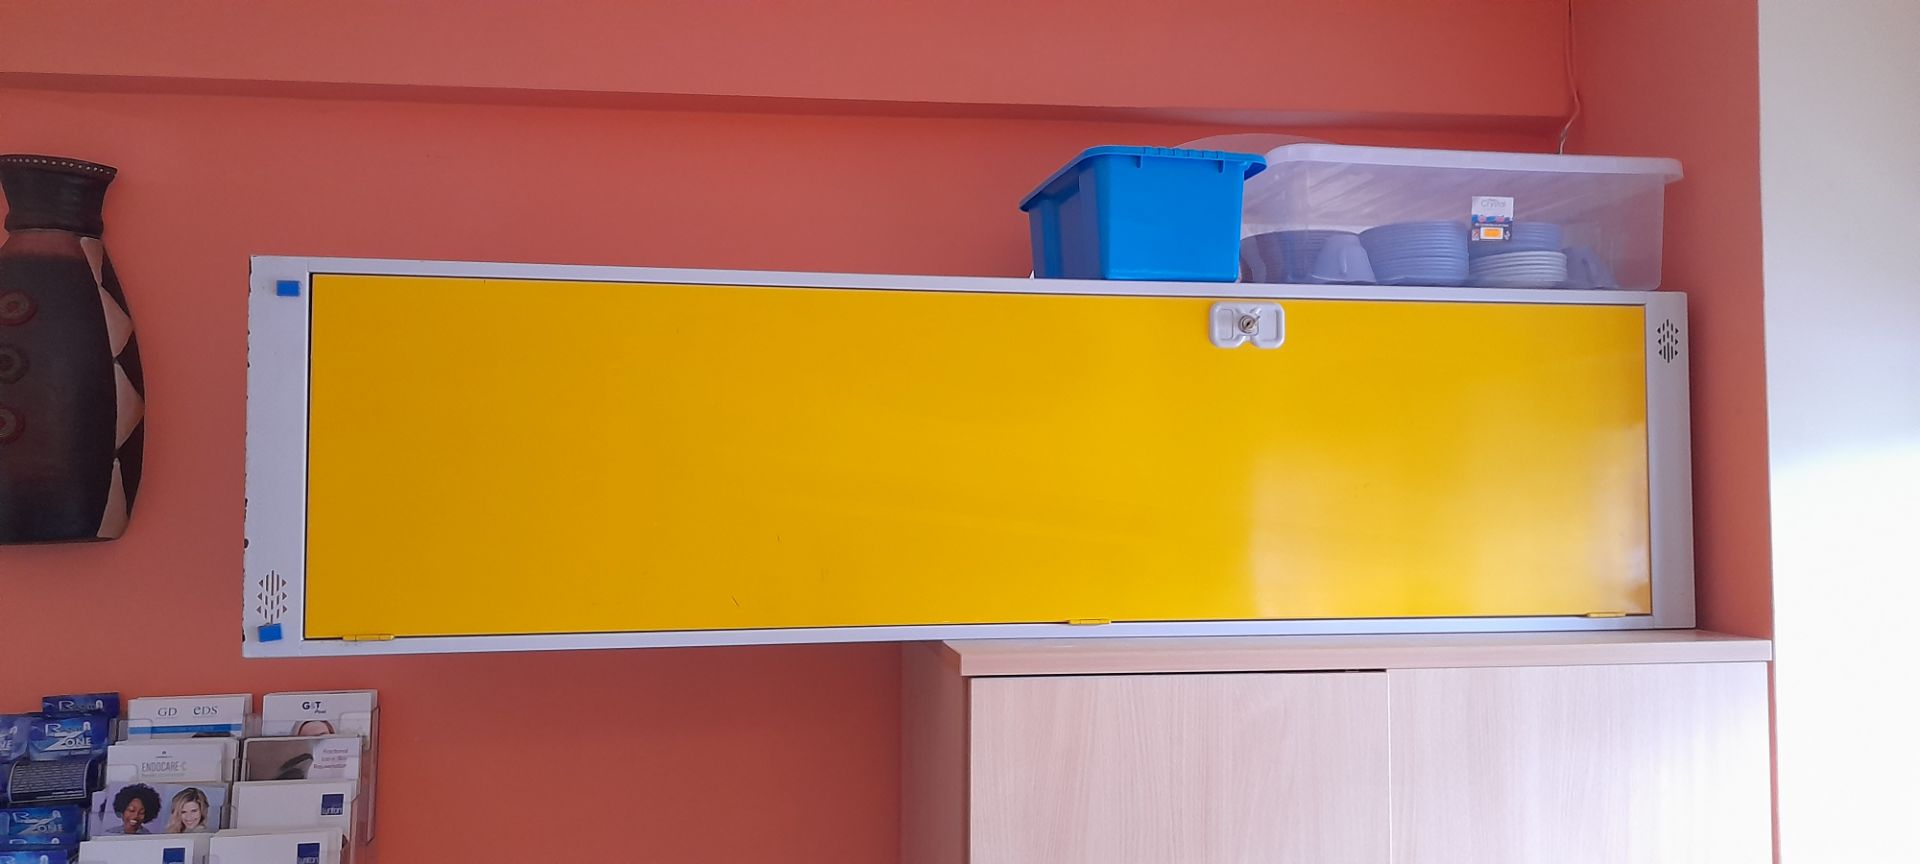 4 x coloured storage lockers with key, contents excluded - Image 4 of 4